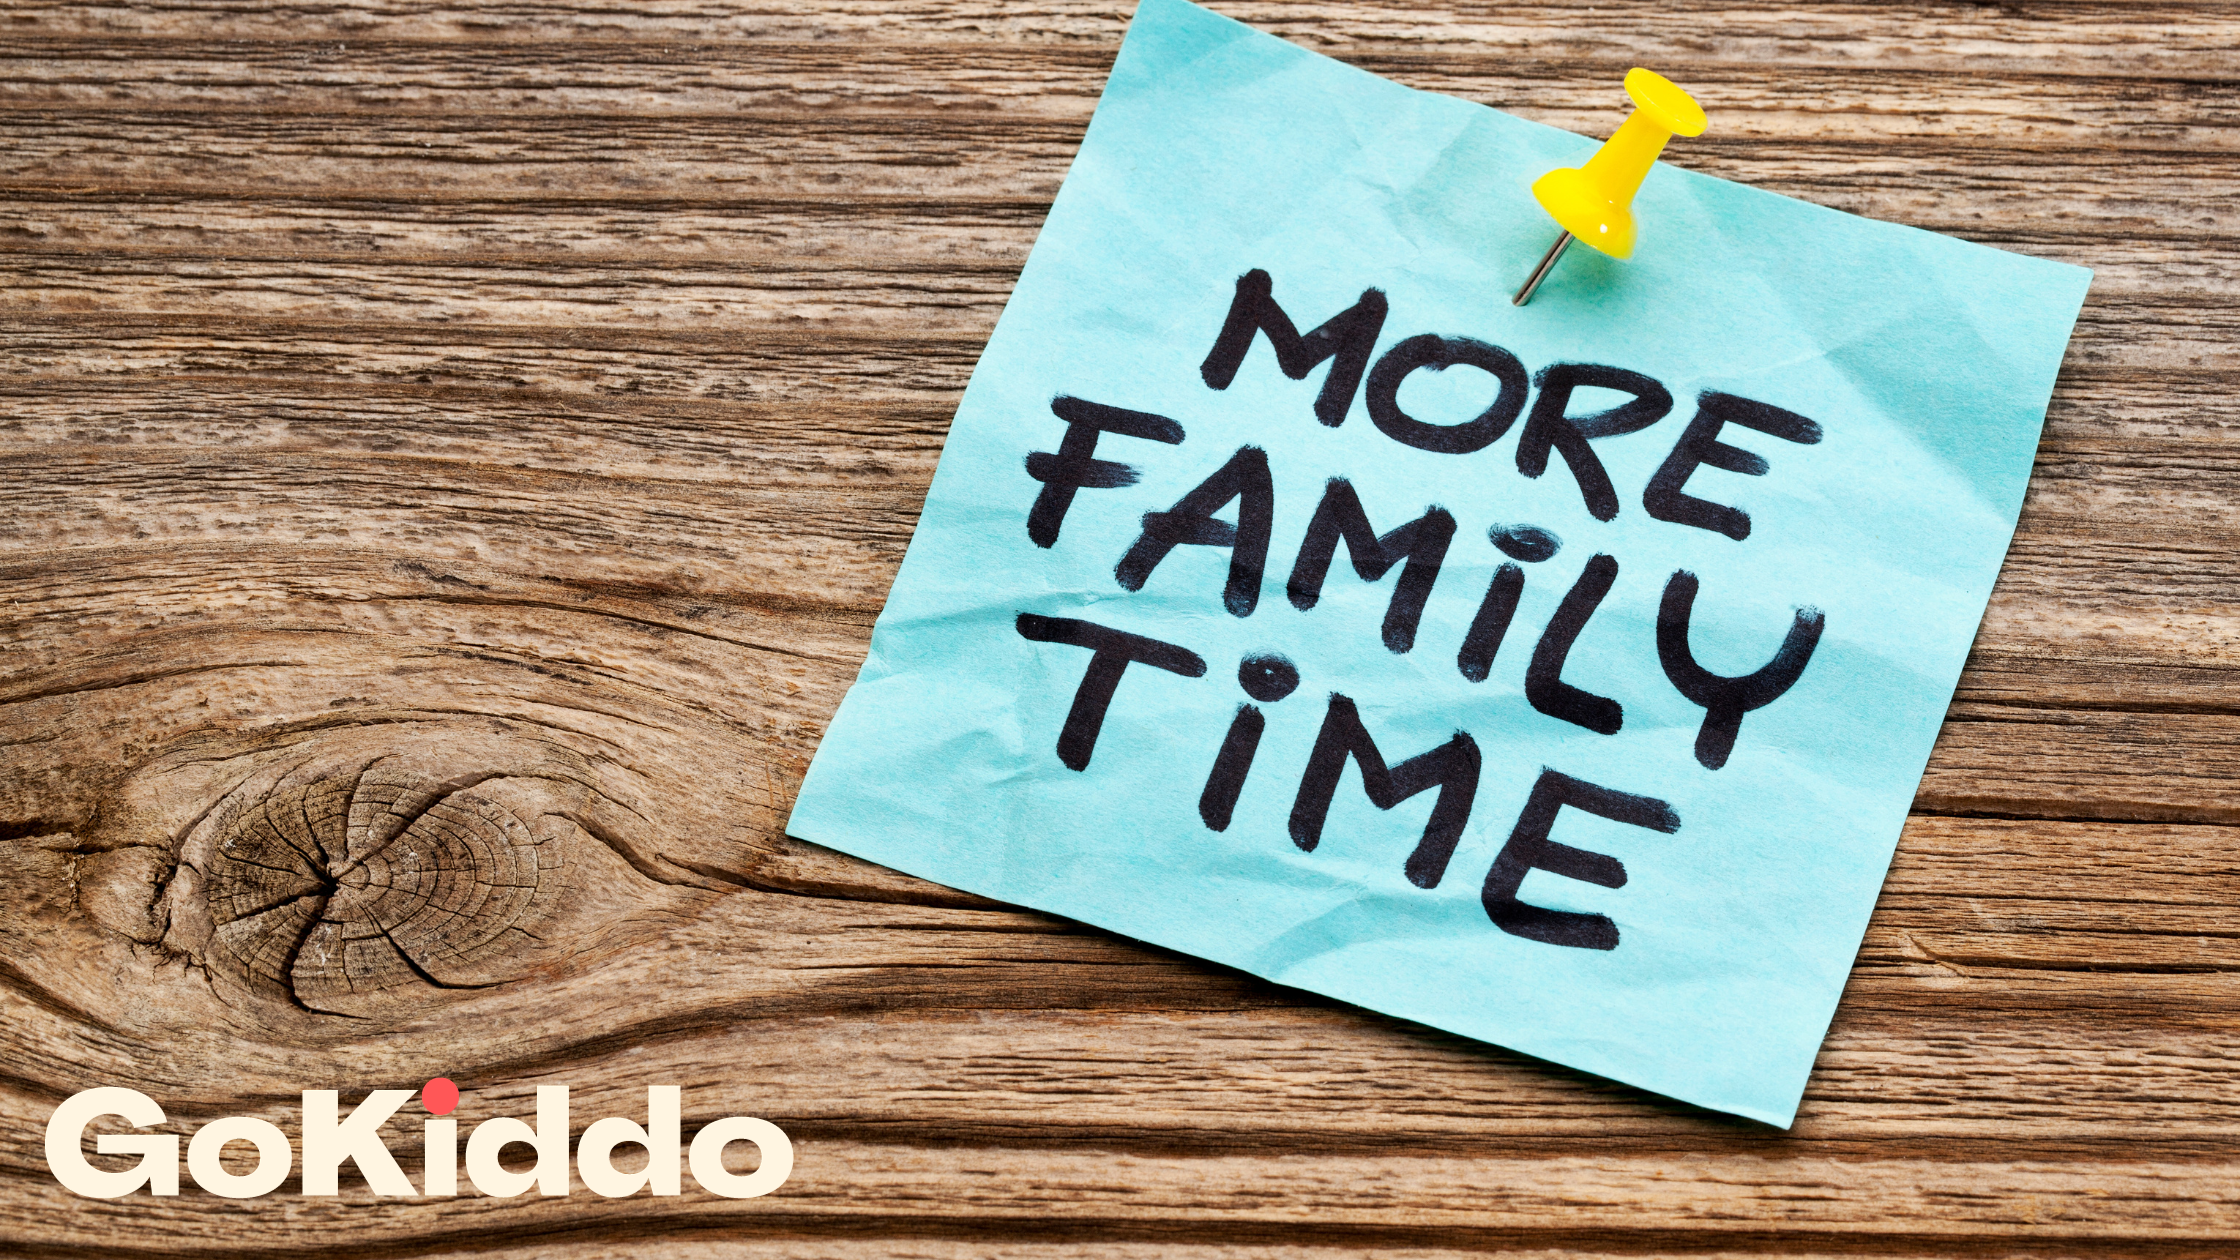 A post-it note saying "More Family Time"